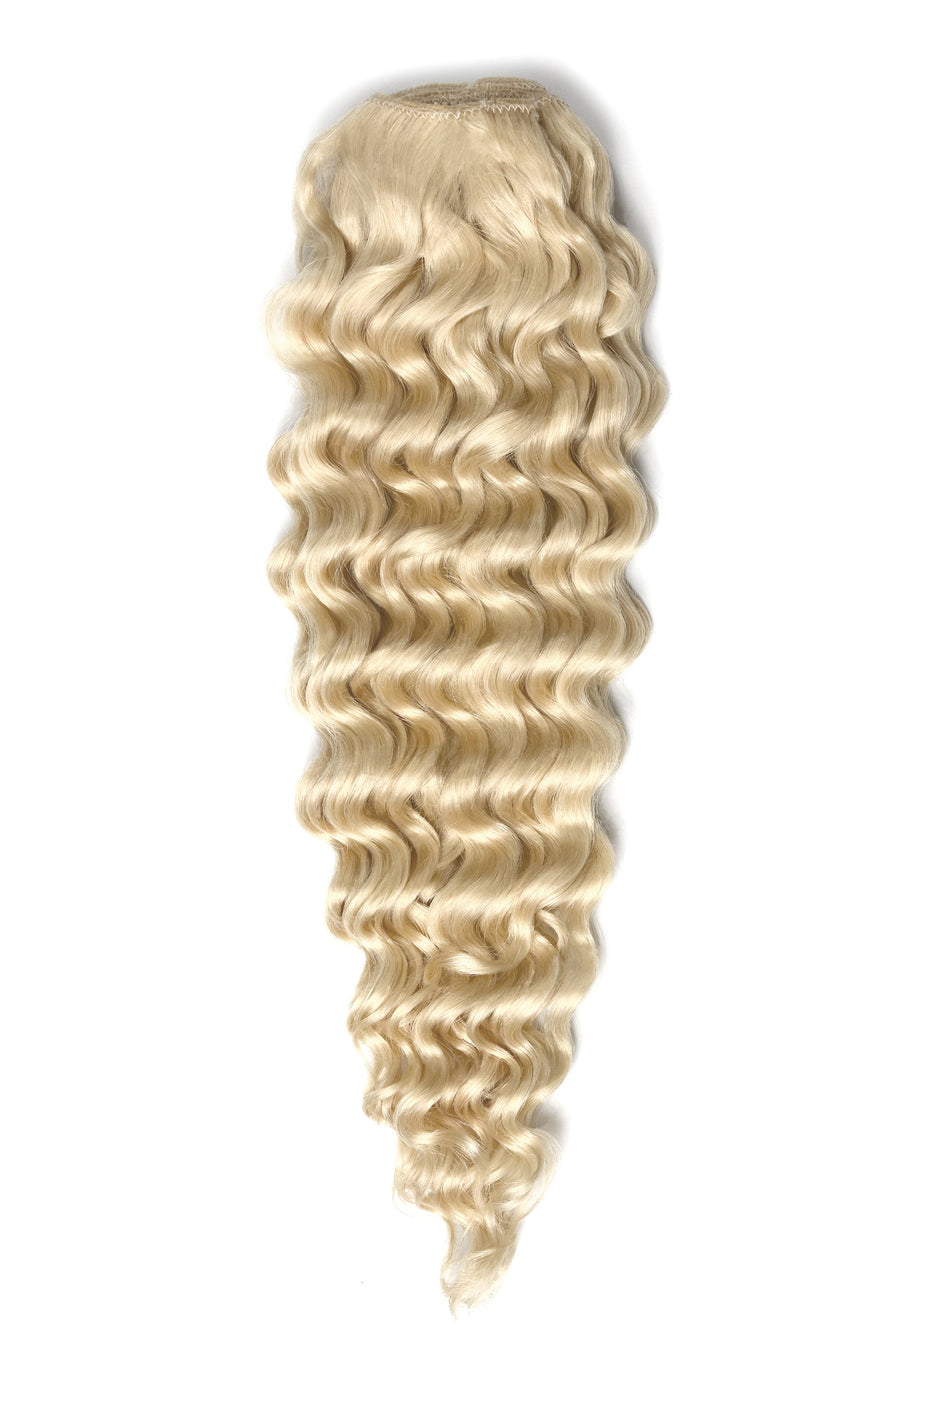 Curly Clip In Hair Extensions Online 100% Human Hair USA – Cliphair US